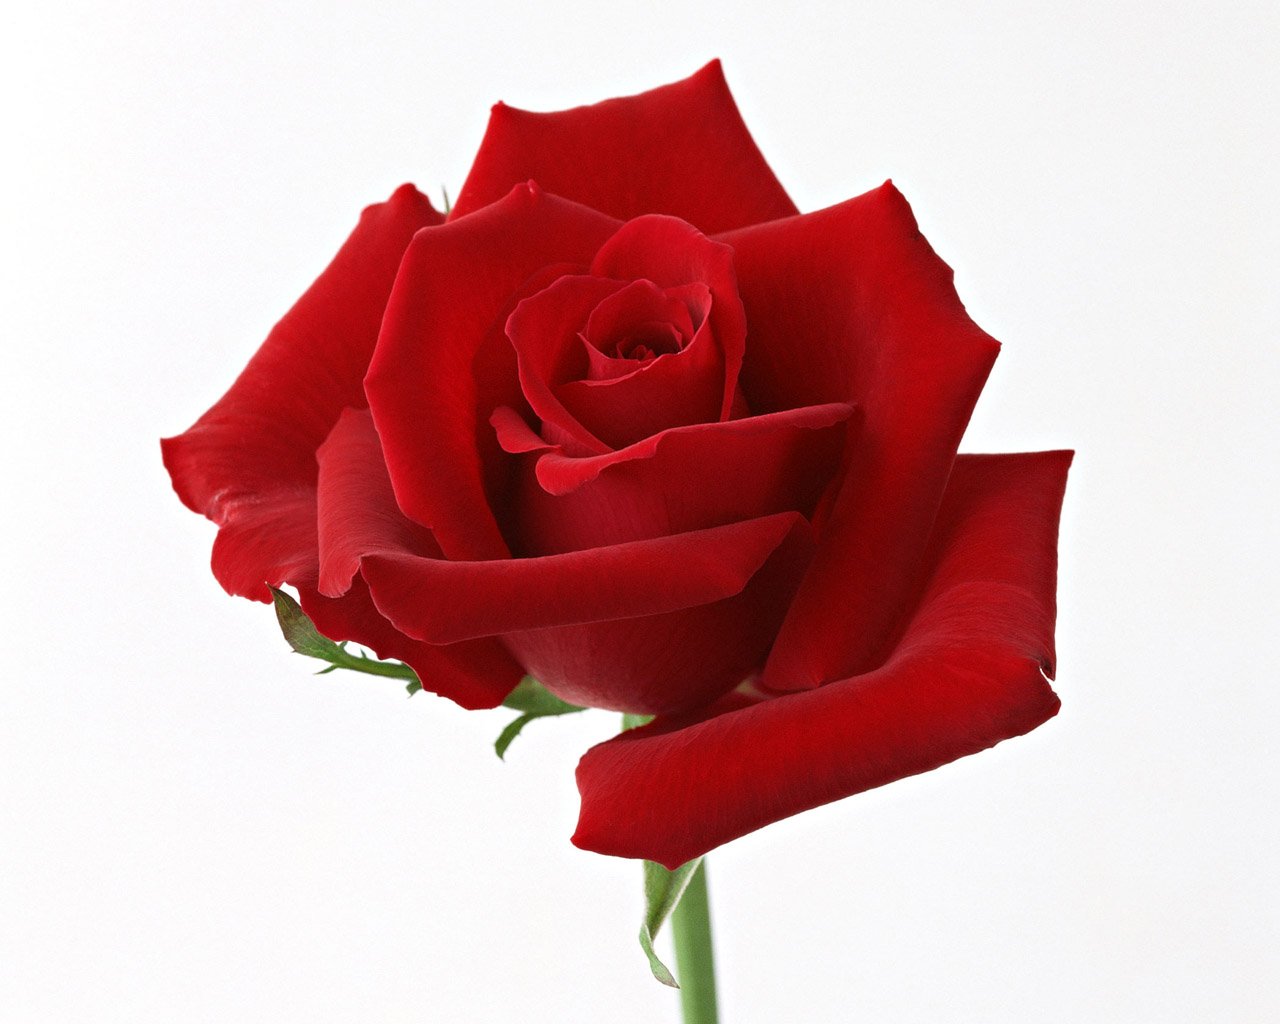 To download click on Red Rose White Background then choose save image